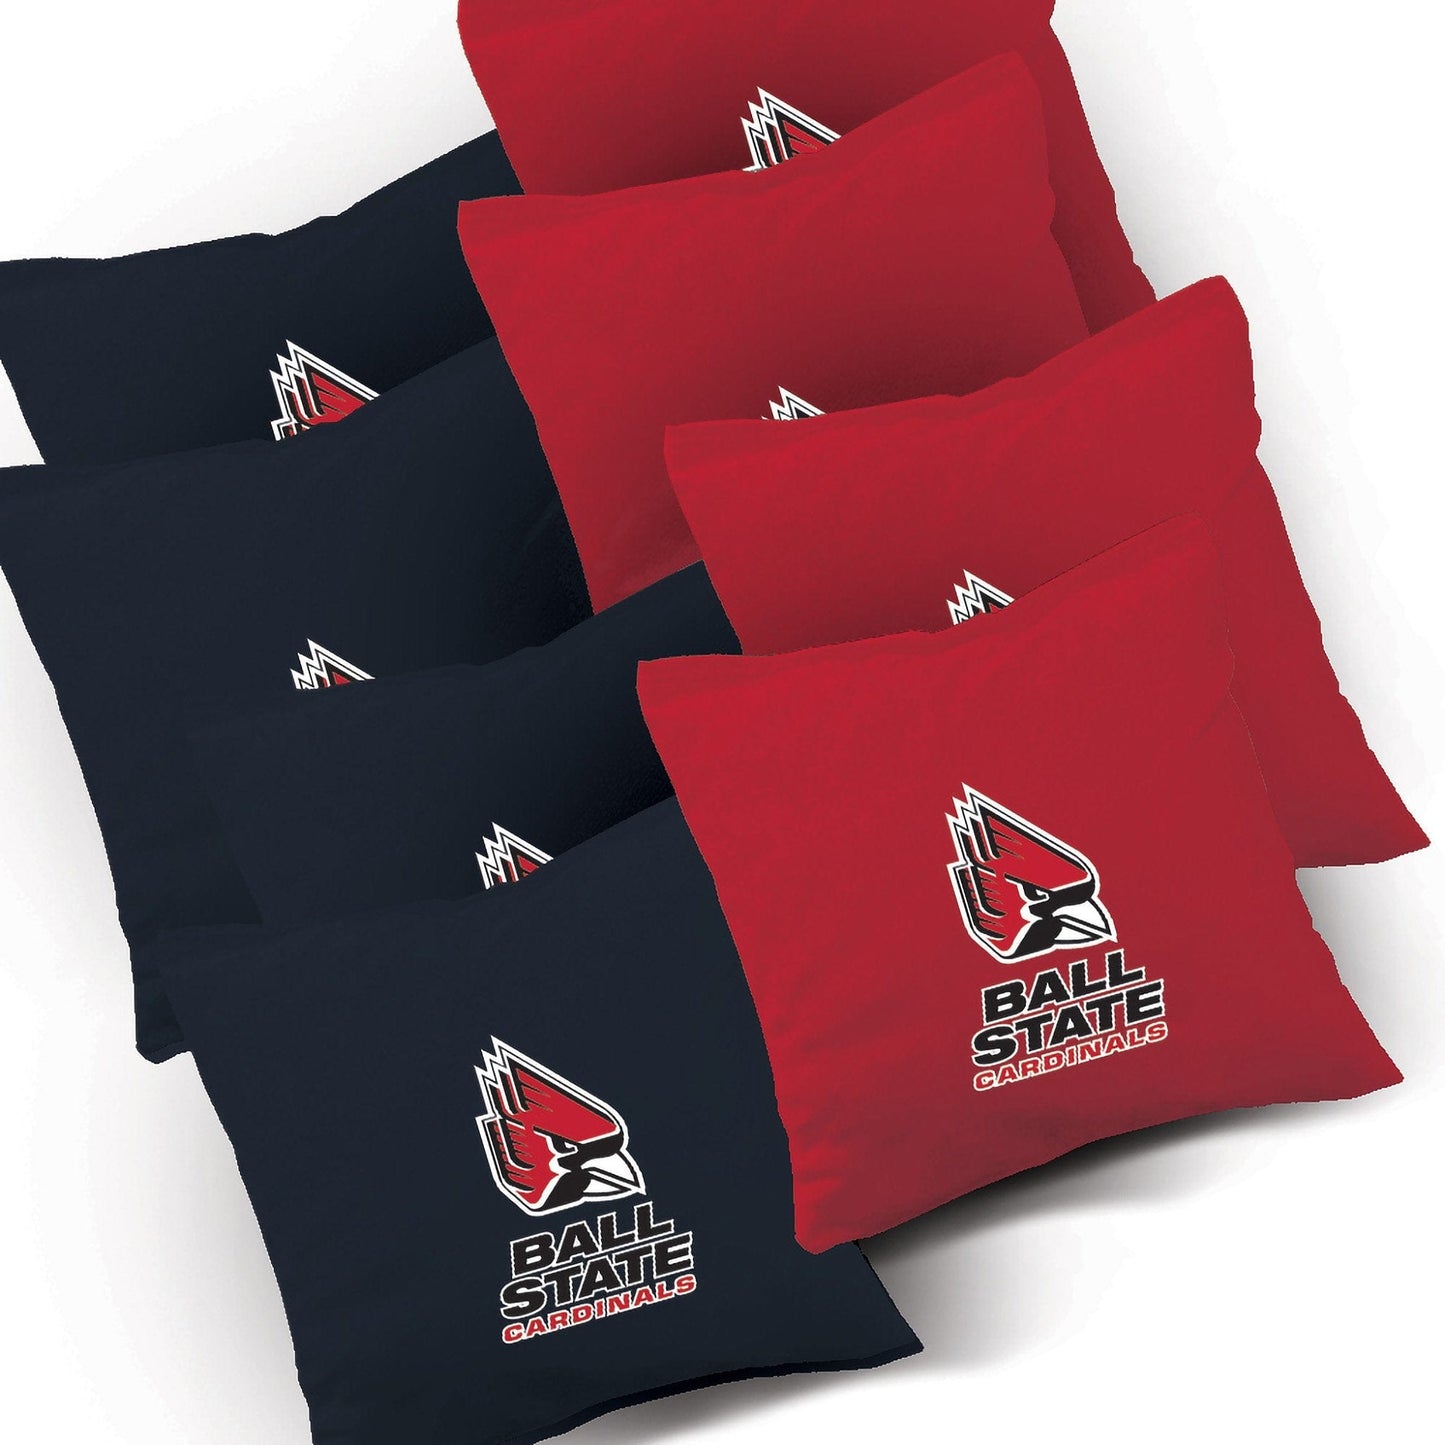 Ball State Cardinals Stained Striped team logo bags